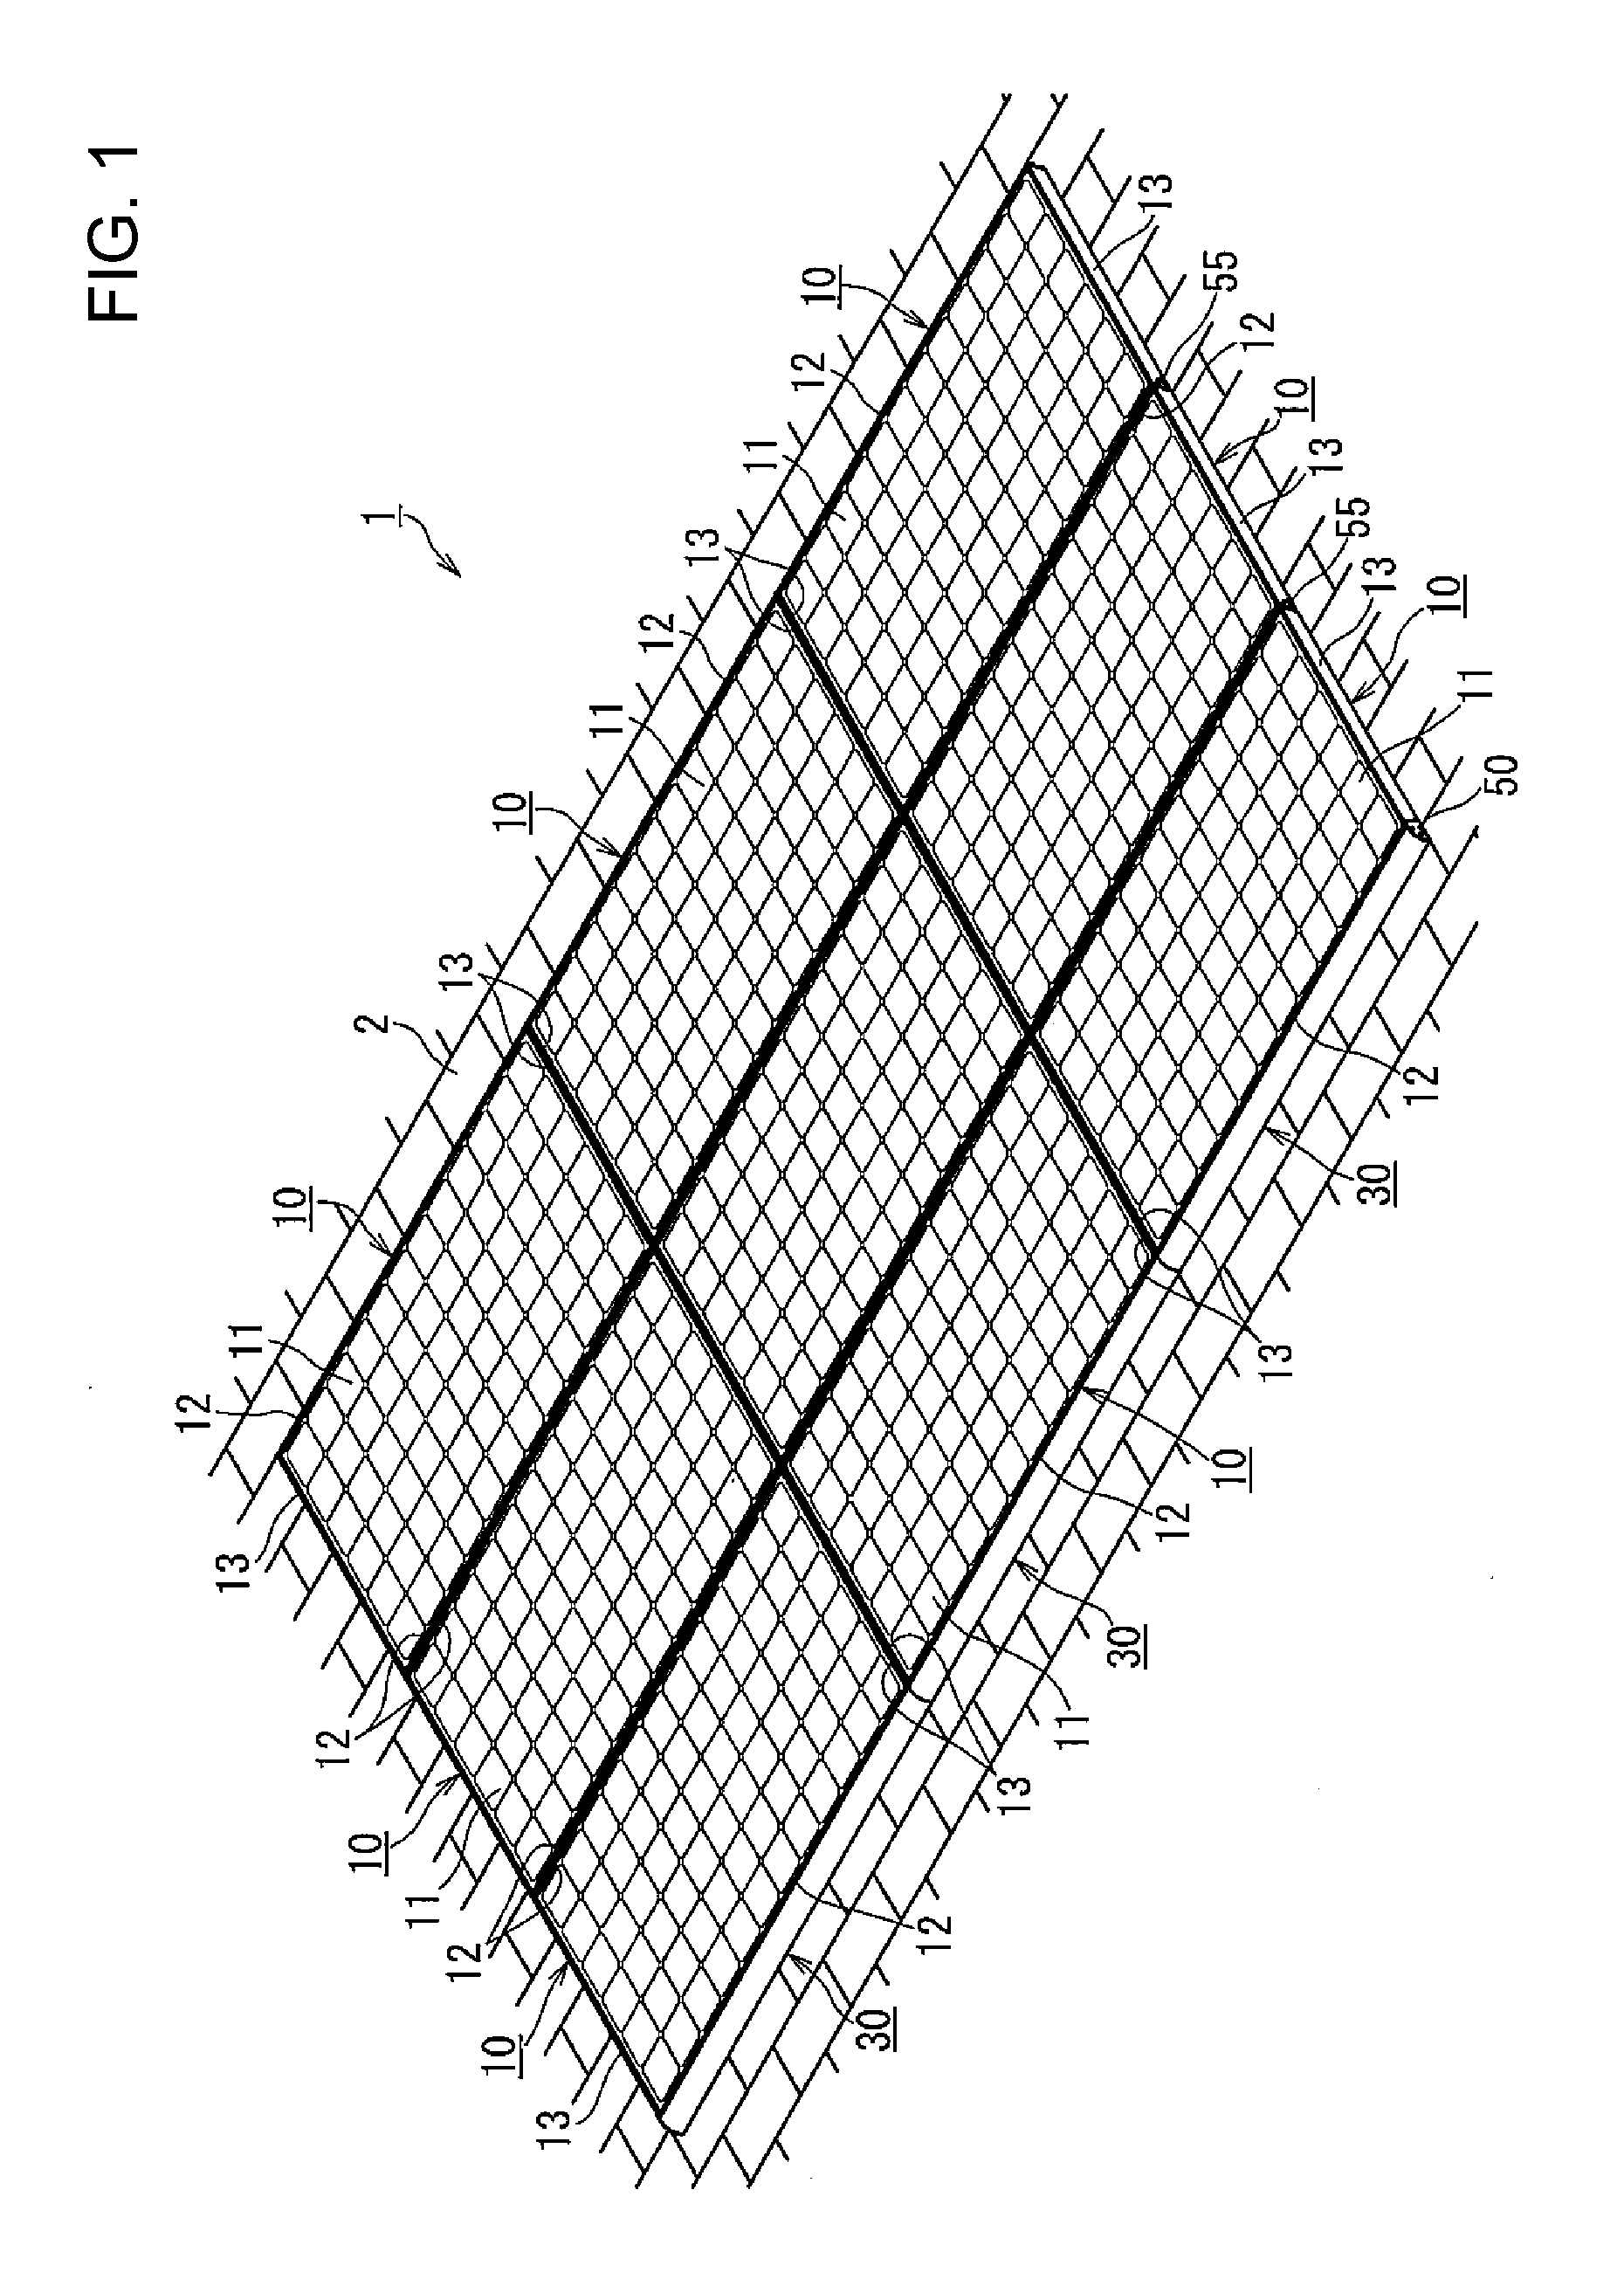 Structure for securing solar cell modules and frame and securing member for solar cell modules